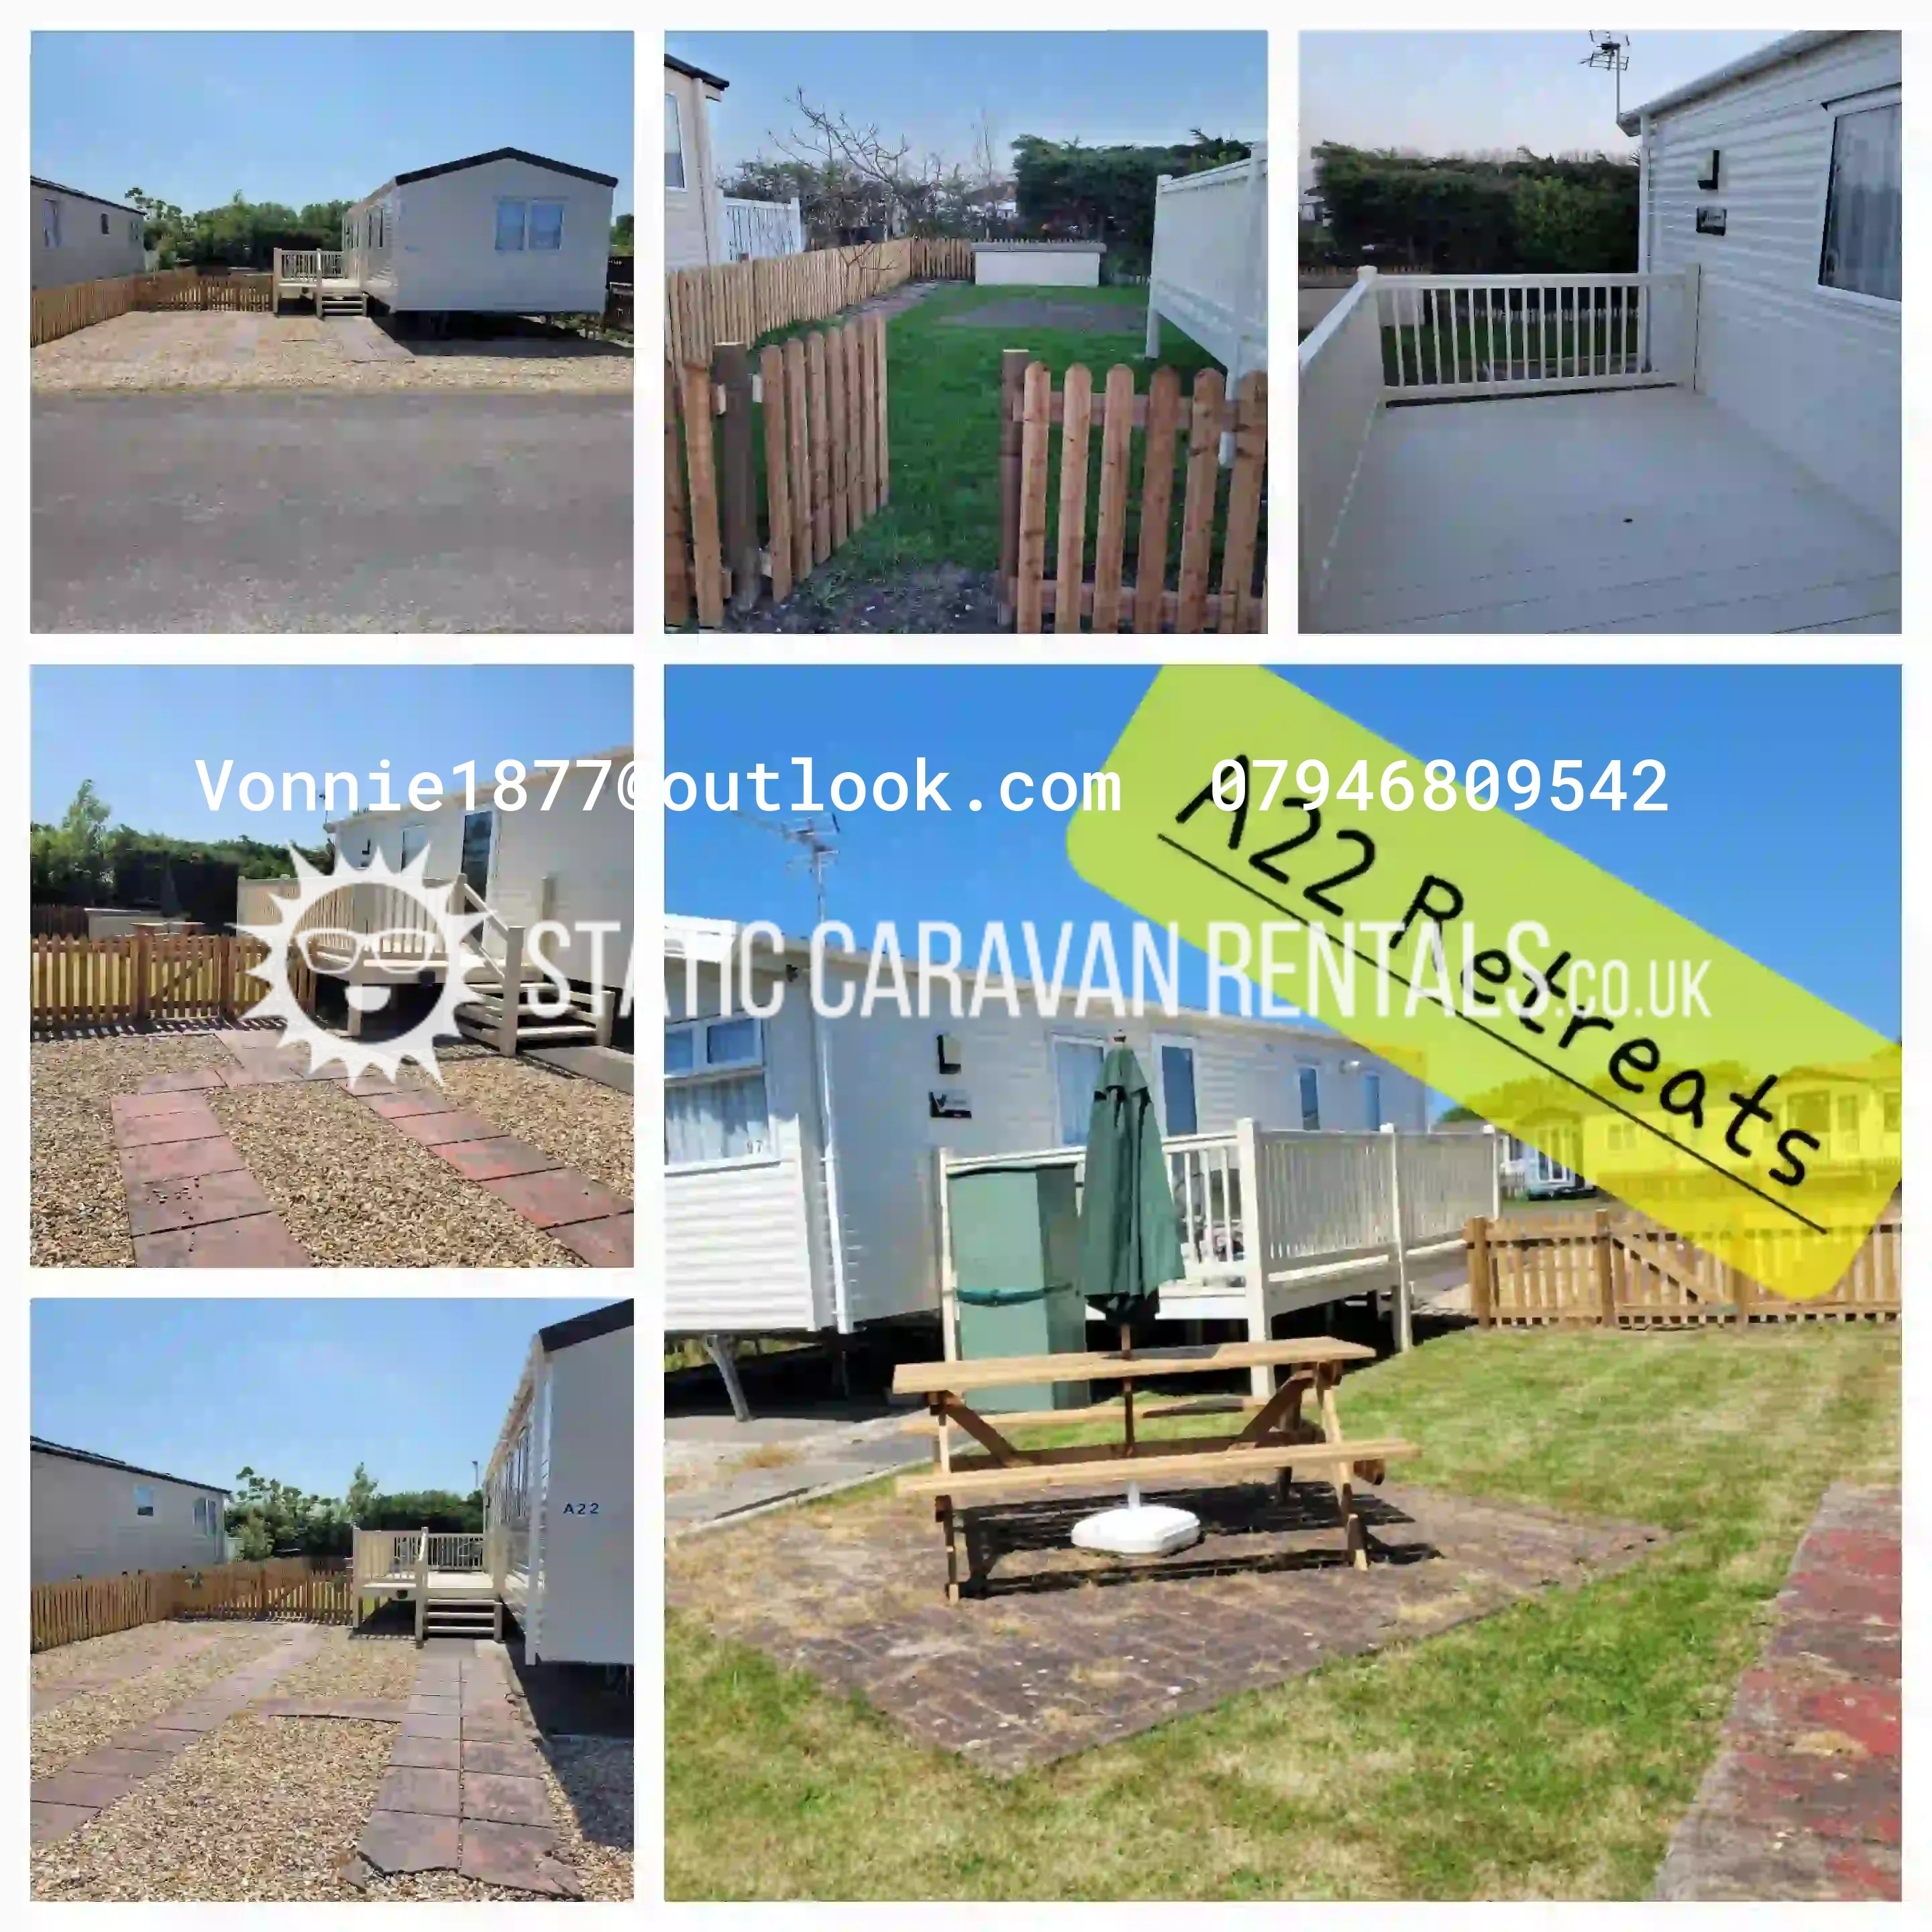 Private Carvan for Hire Unity holiday resort, Brean, Somerset, England